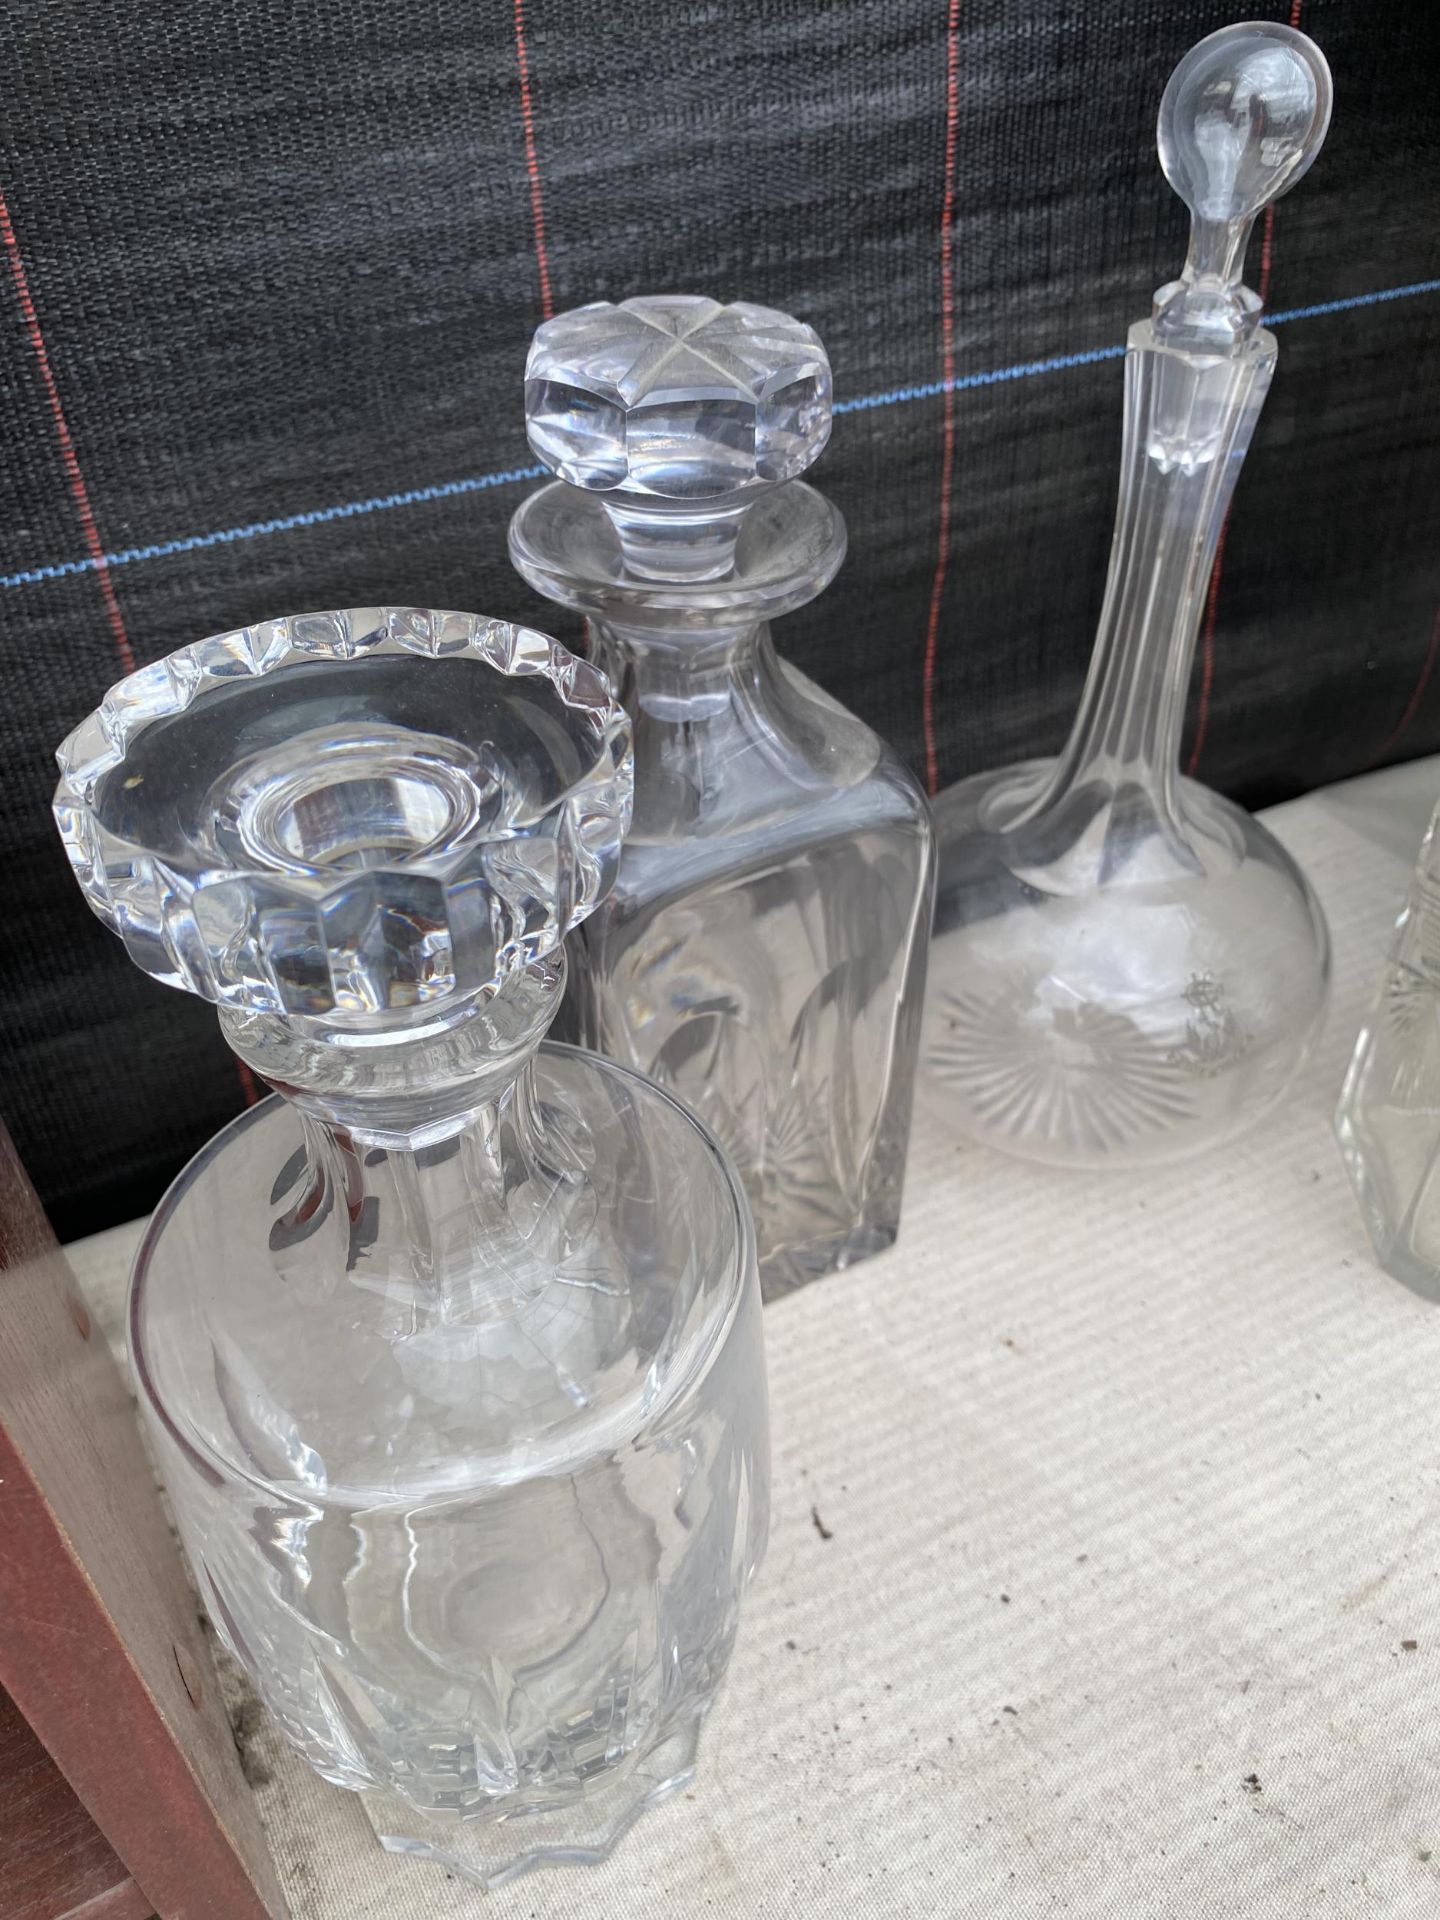 FOUR VINTAGE GLASS DECANTERS - Image 2 of 3